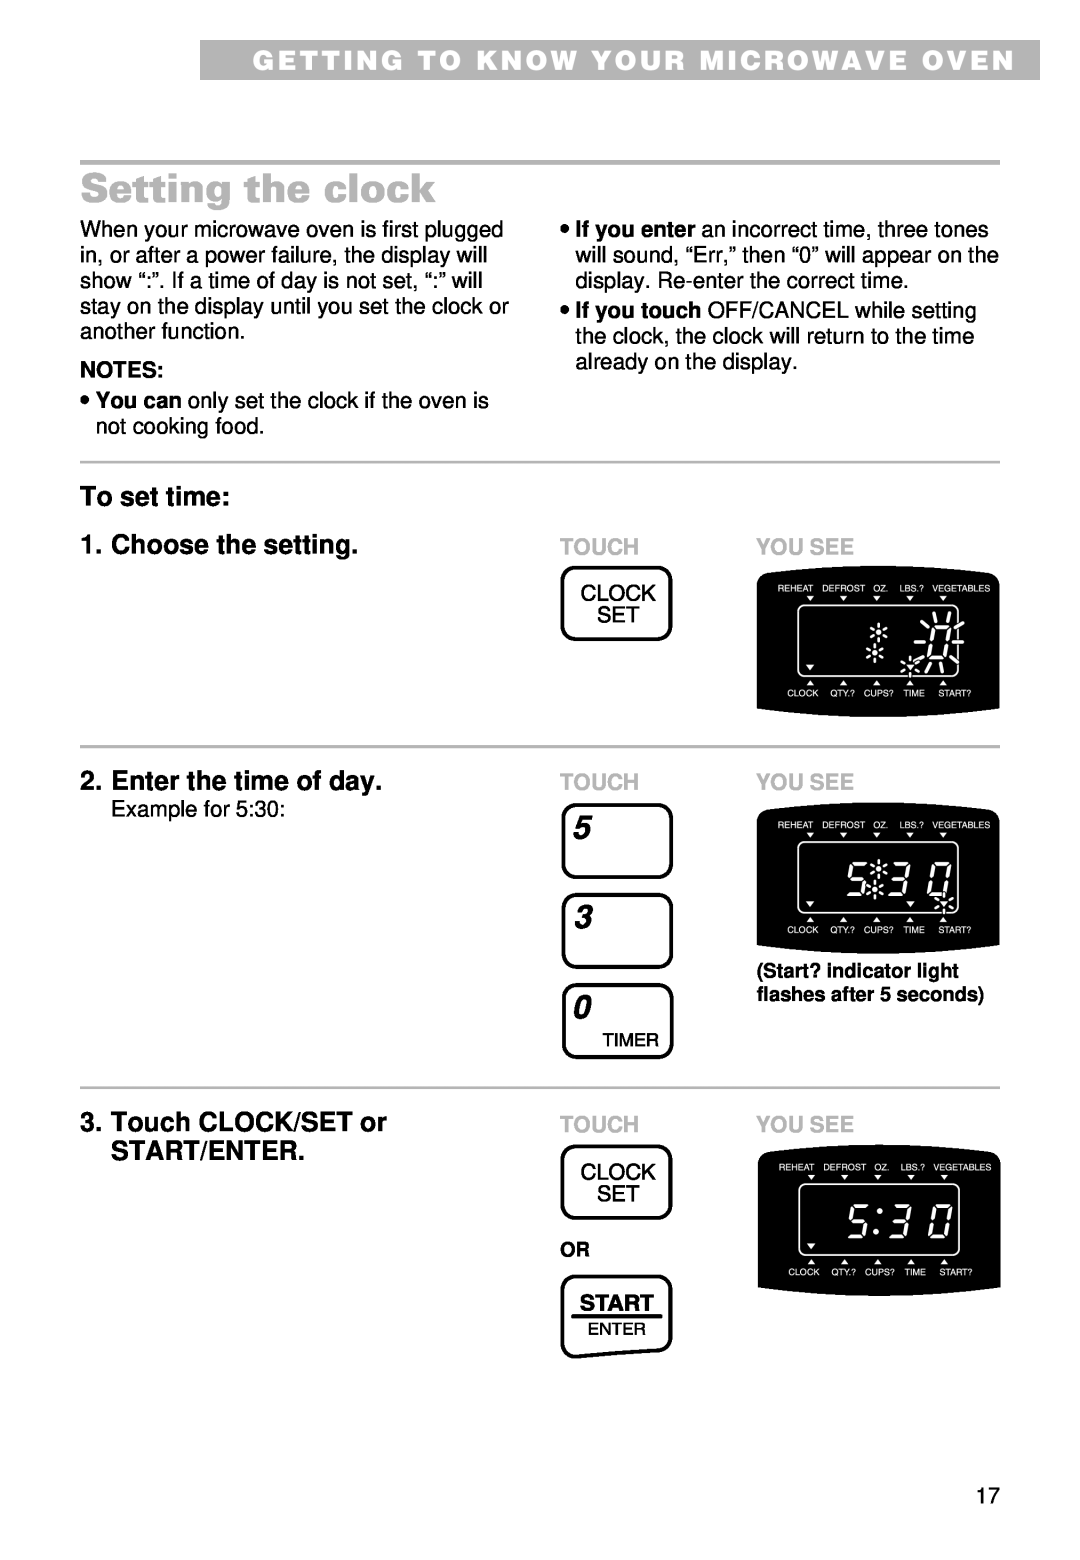 Whirlpool MT9101SF, MT9100SF Setting the clock, Getting To Know Your Microwave Oven, To set time 1. Choose the setting 